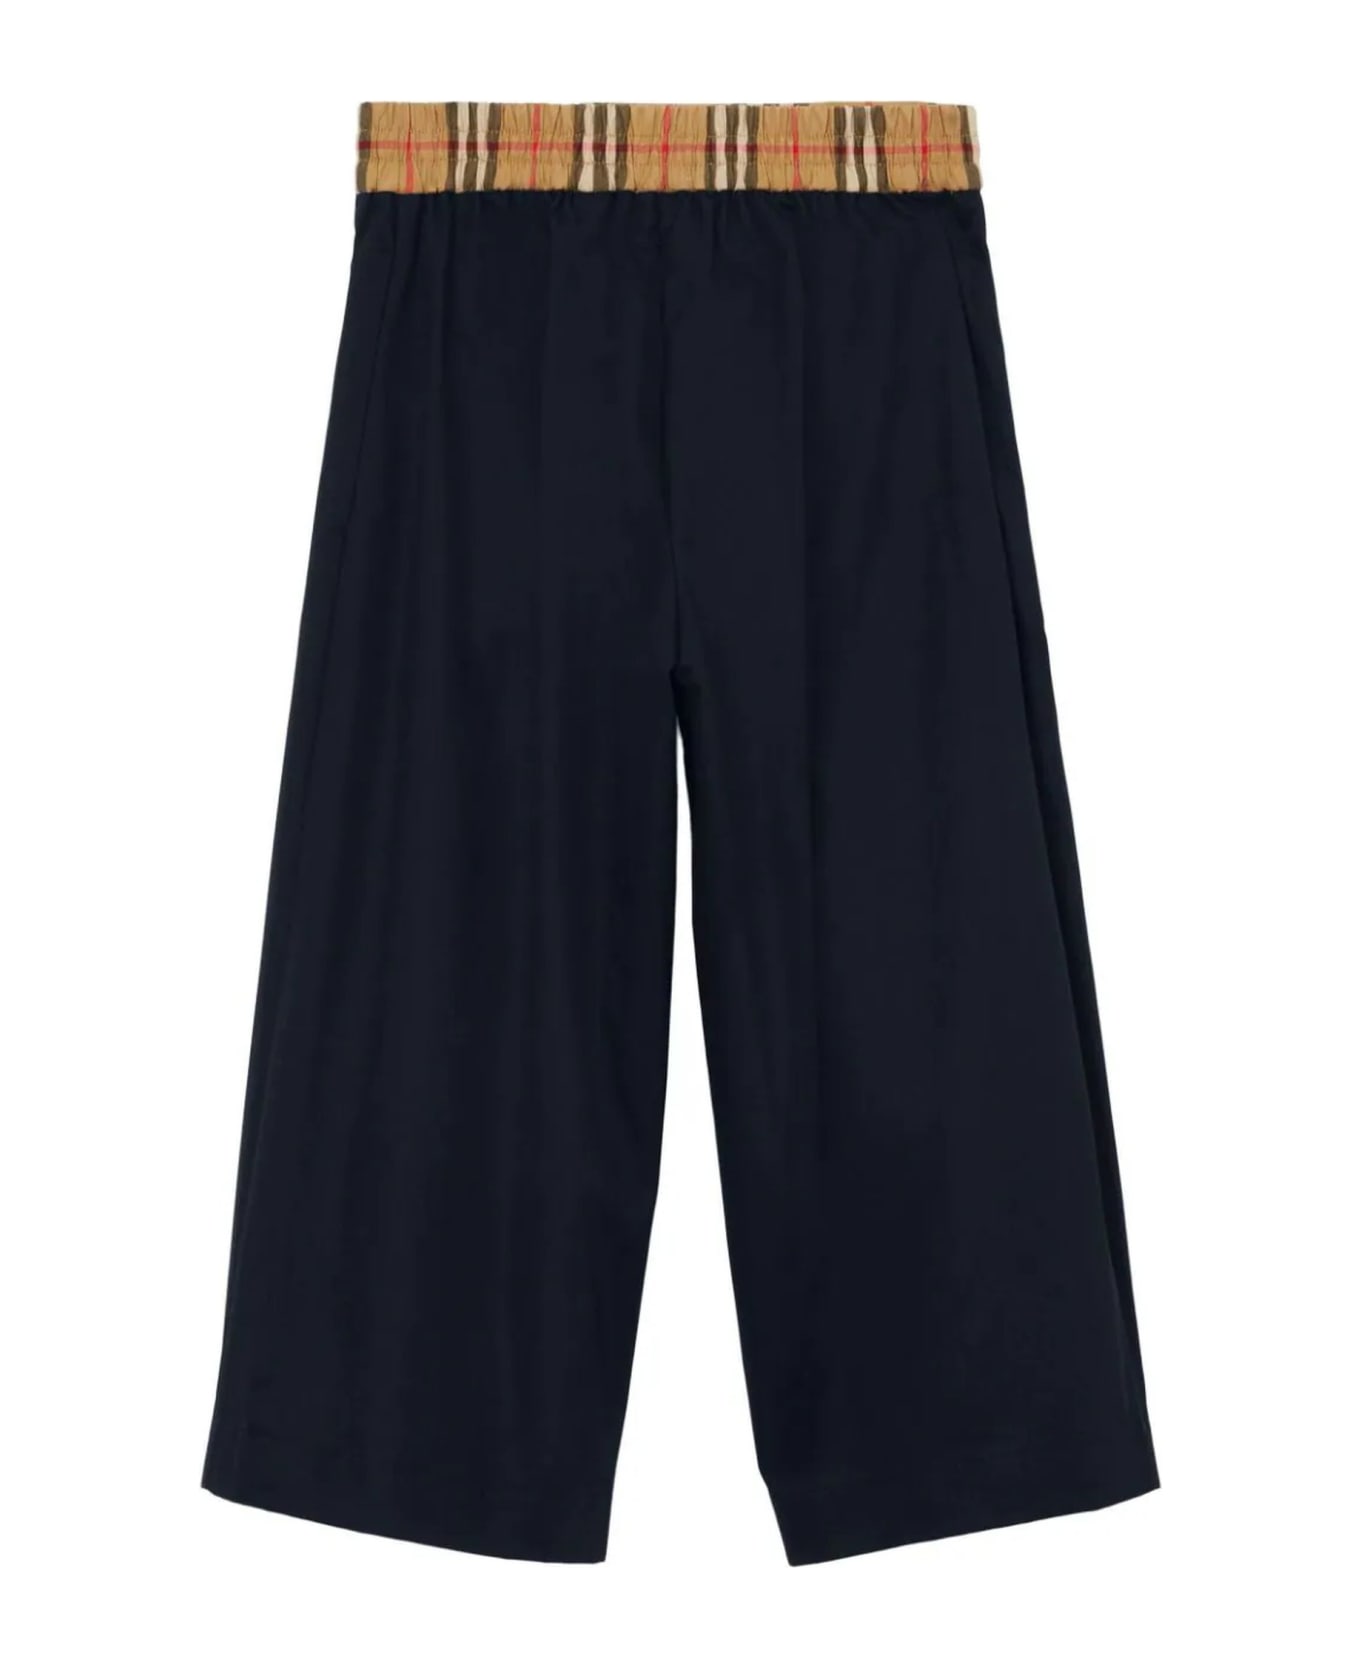 Burberry Navy Blue Cotton Trousers - Navy black ボトムス